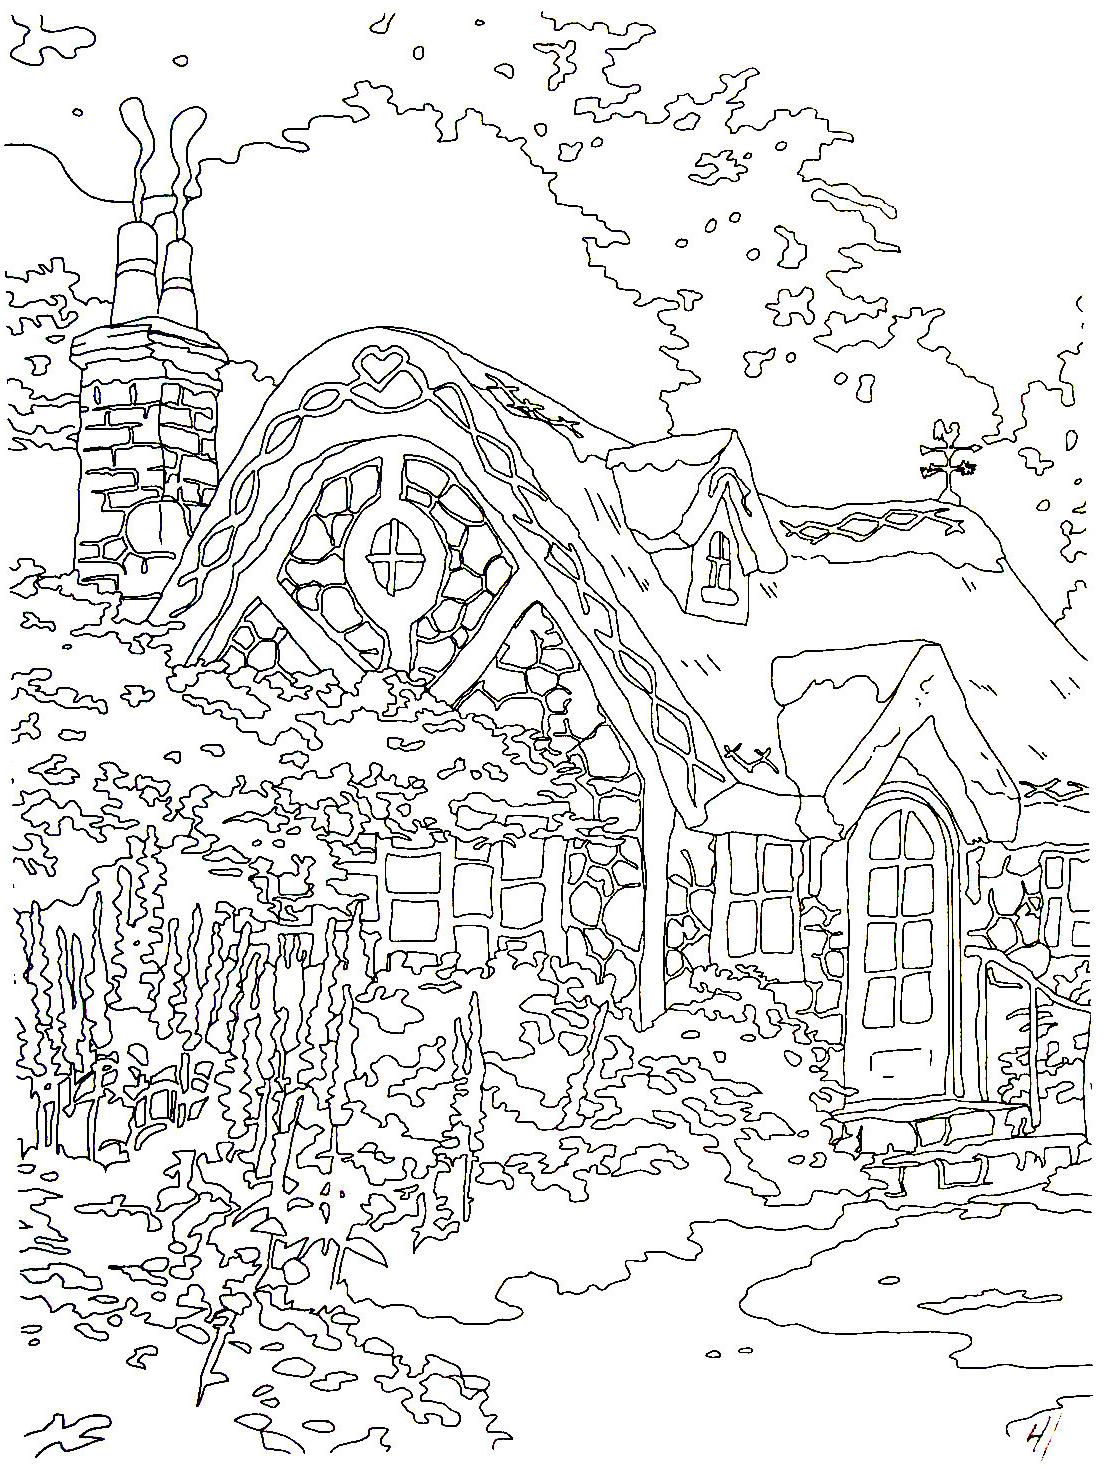 Candlelight cottage thomas kinkade painting coloring book printable page coloring books abstract coloring pages kinkade paintings